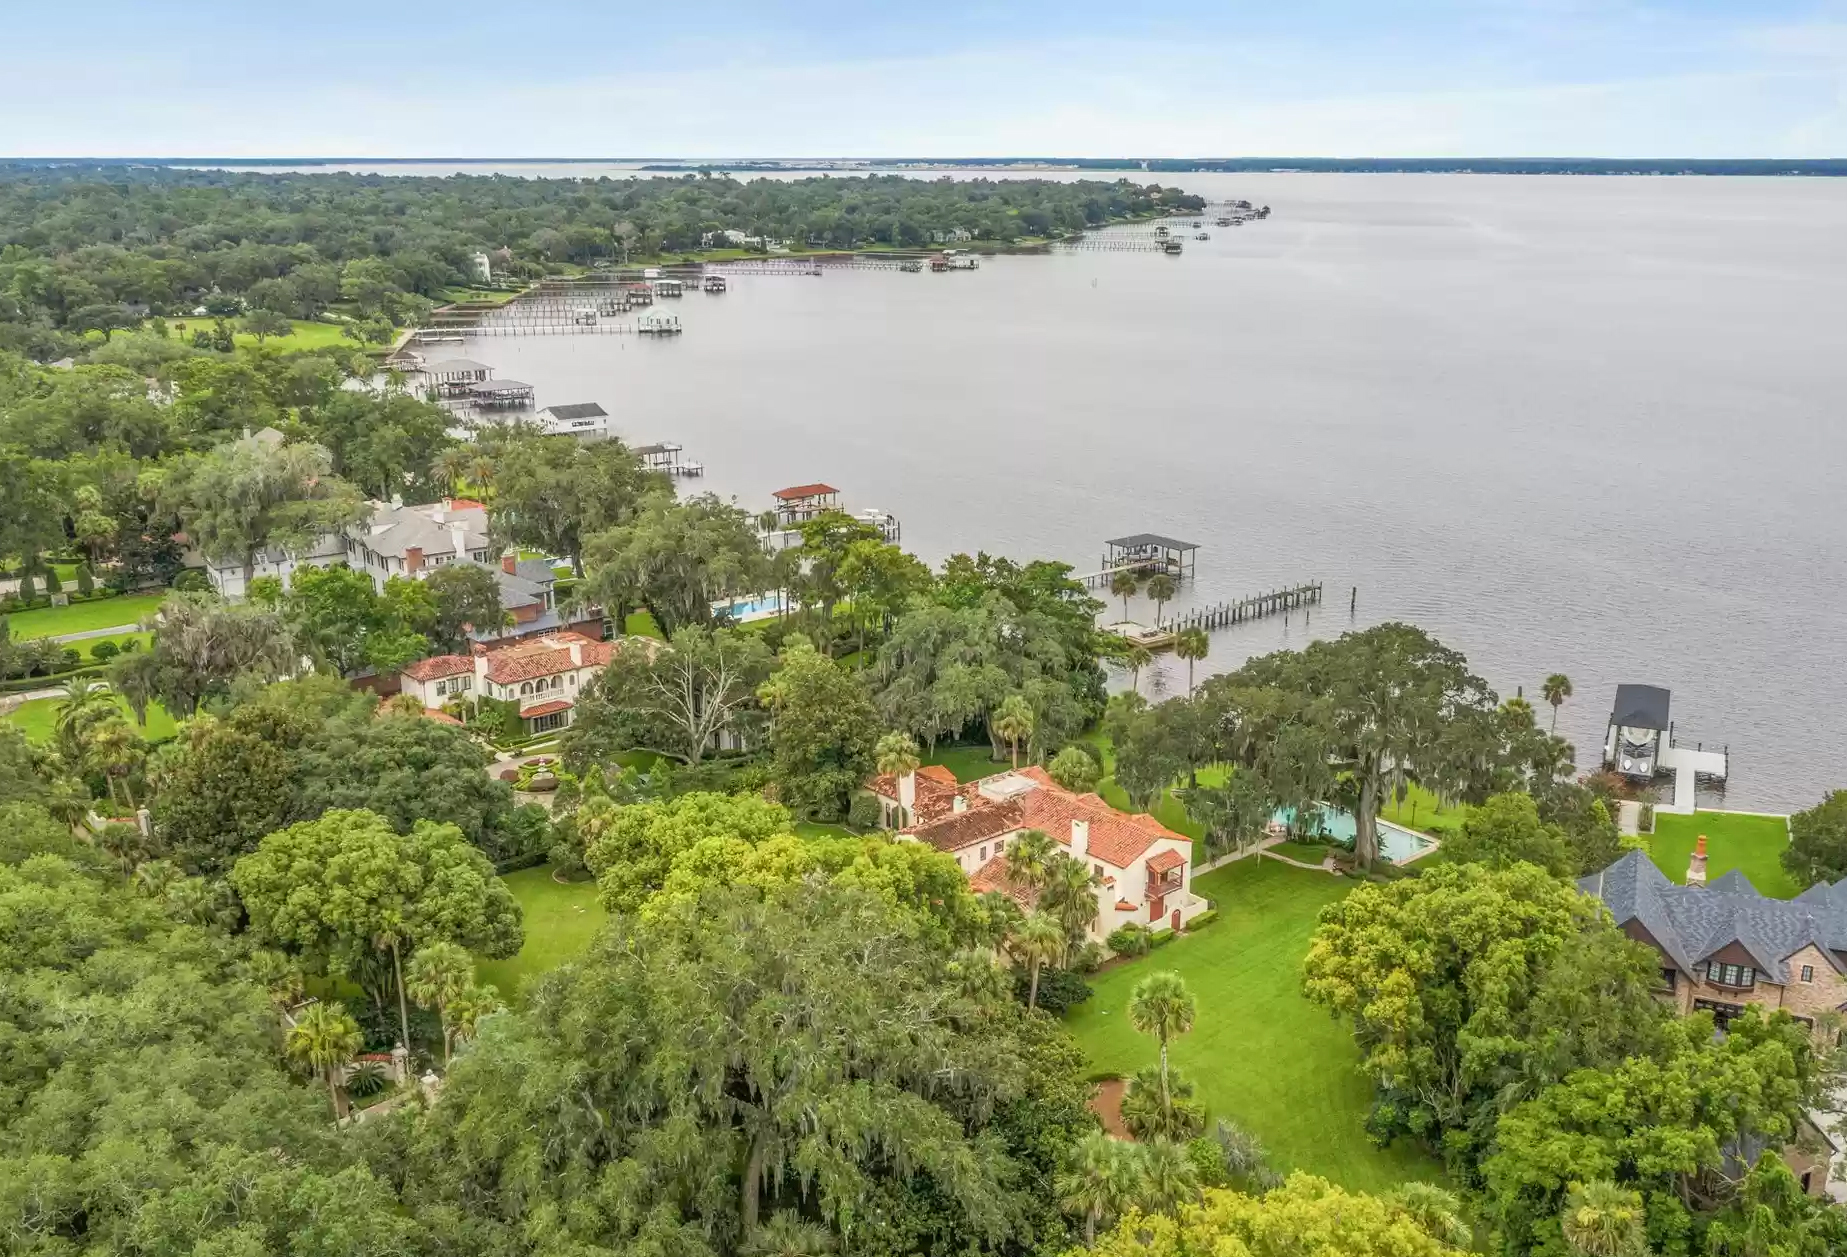 The home features views of the St. Johns River.